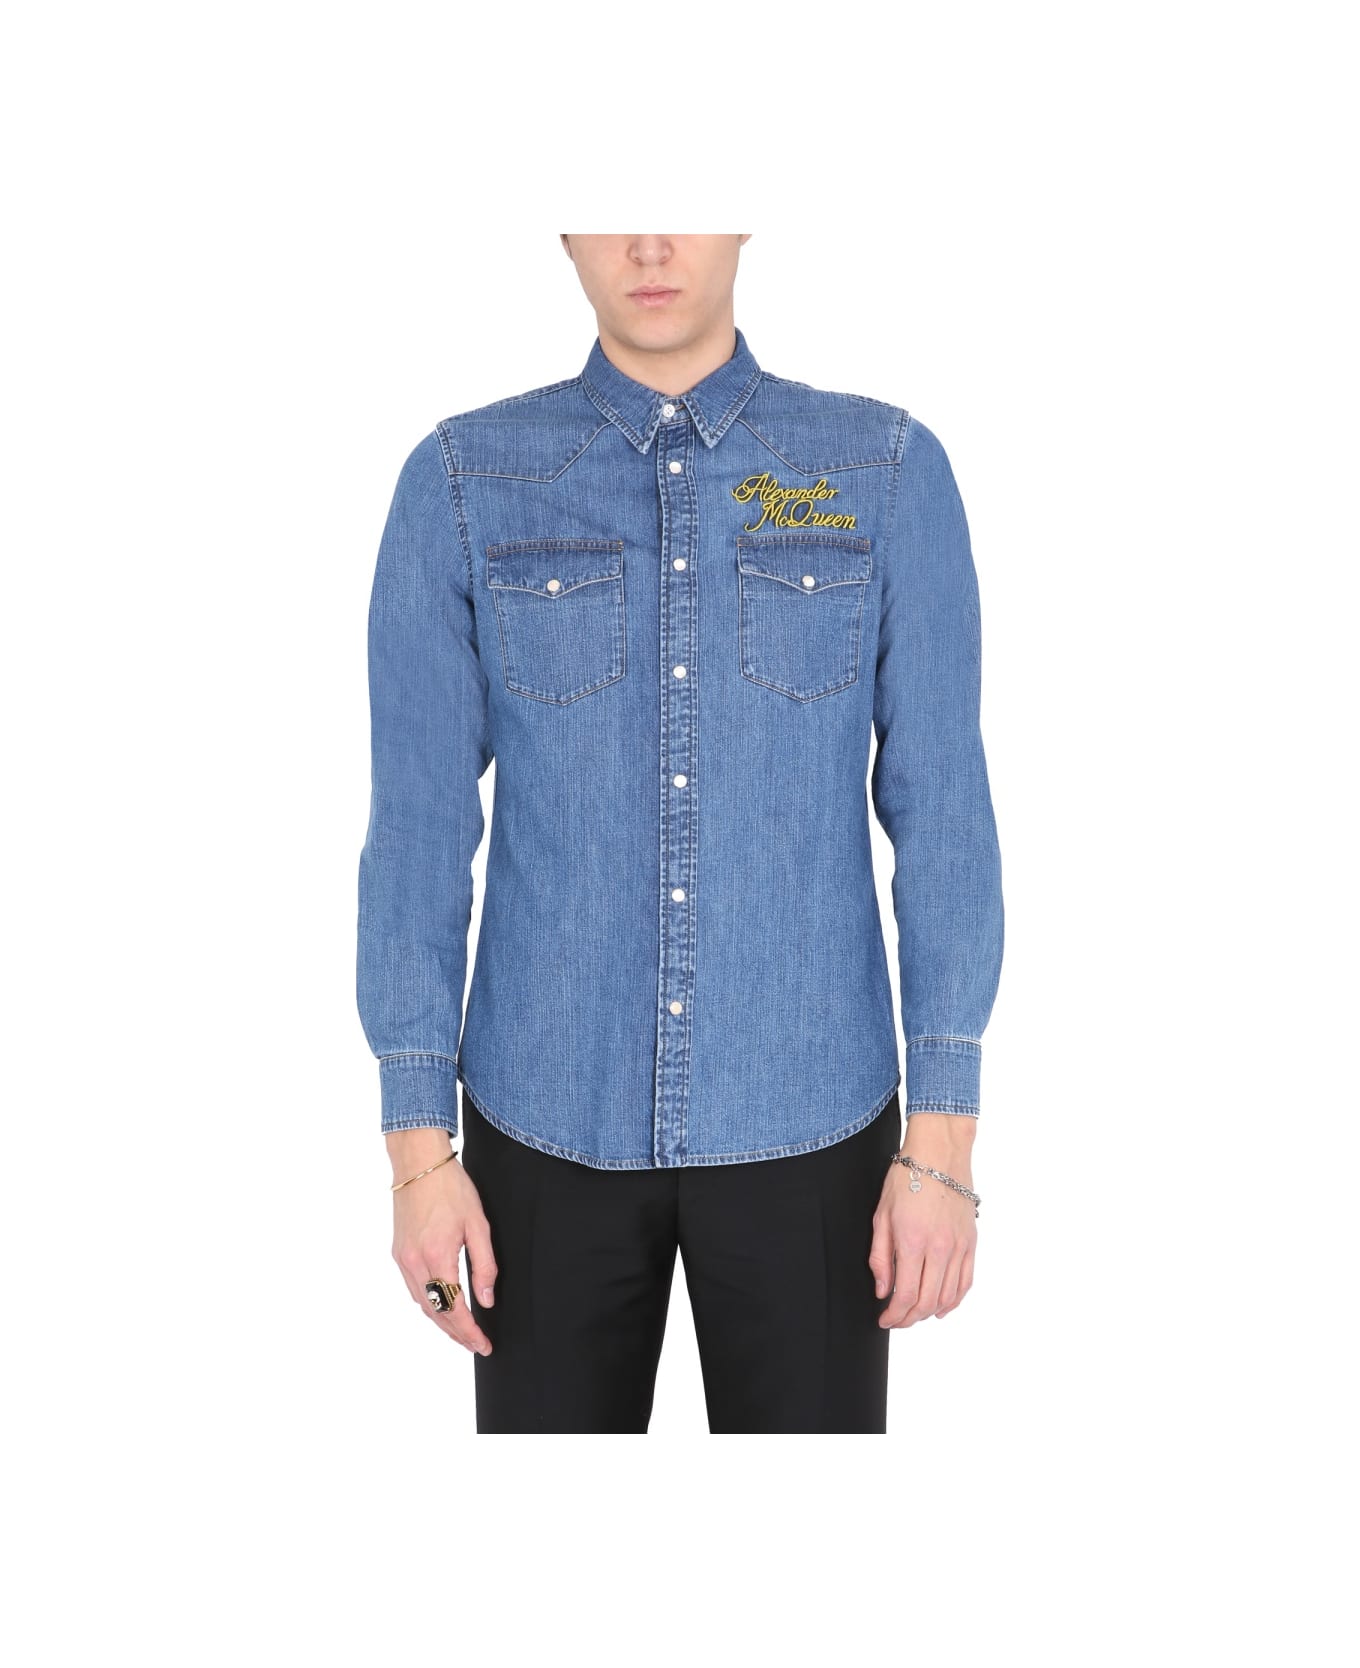 Alexander McQueen Shirt With Embroidered Logo - BLUE